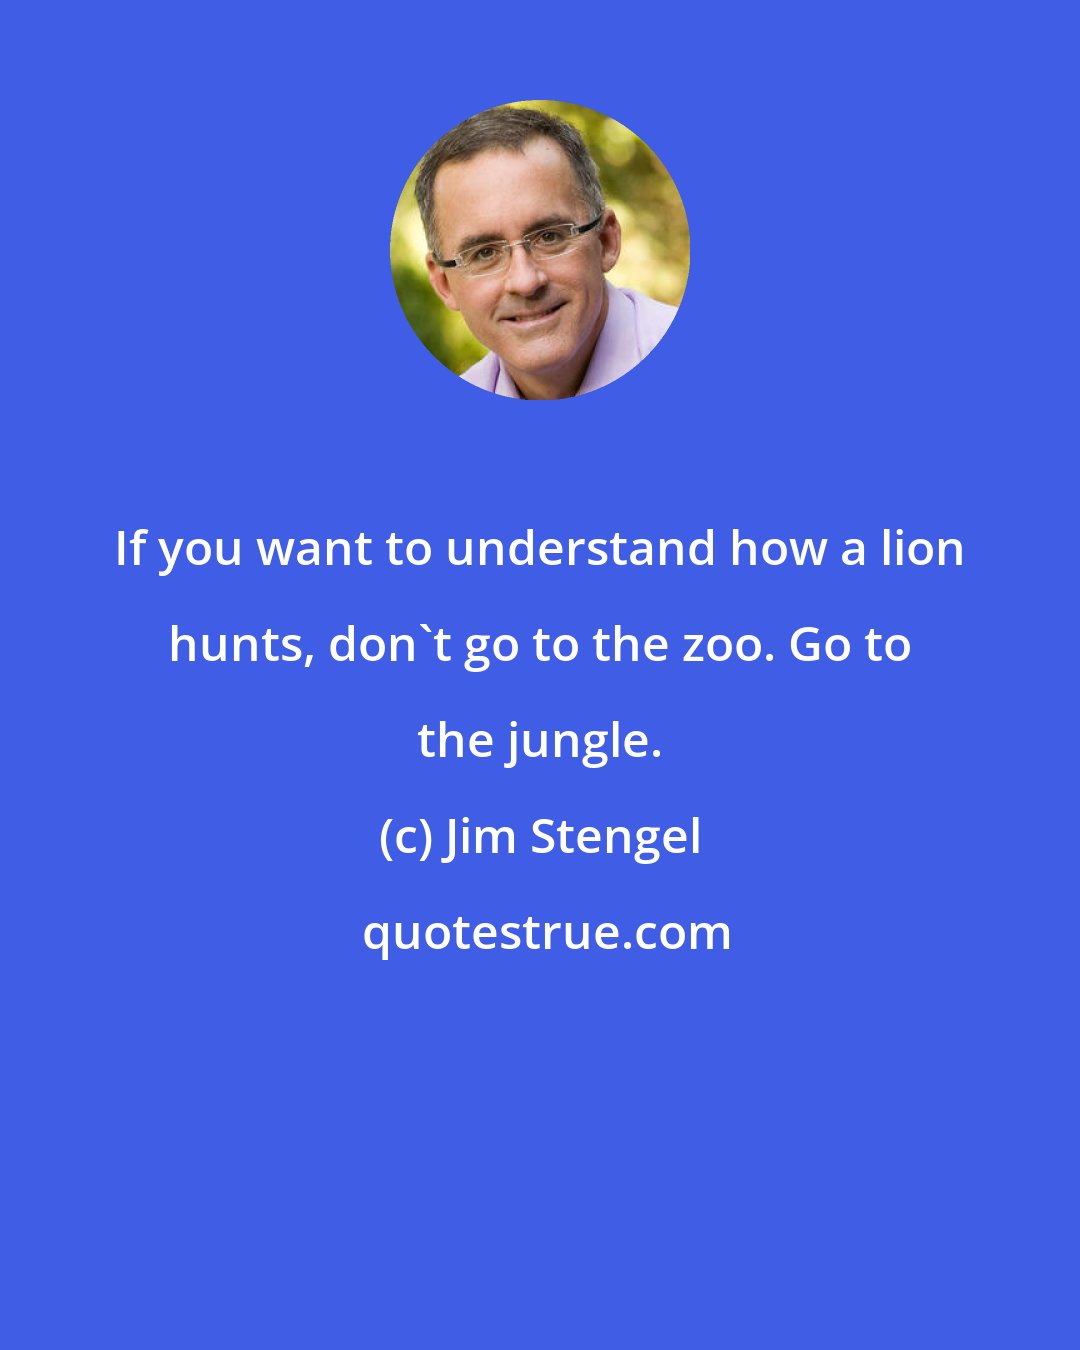 Jim Stengel: If you want to understand how a lion hunts, don't go to the zoo. Go to the jungle.